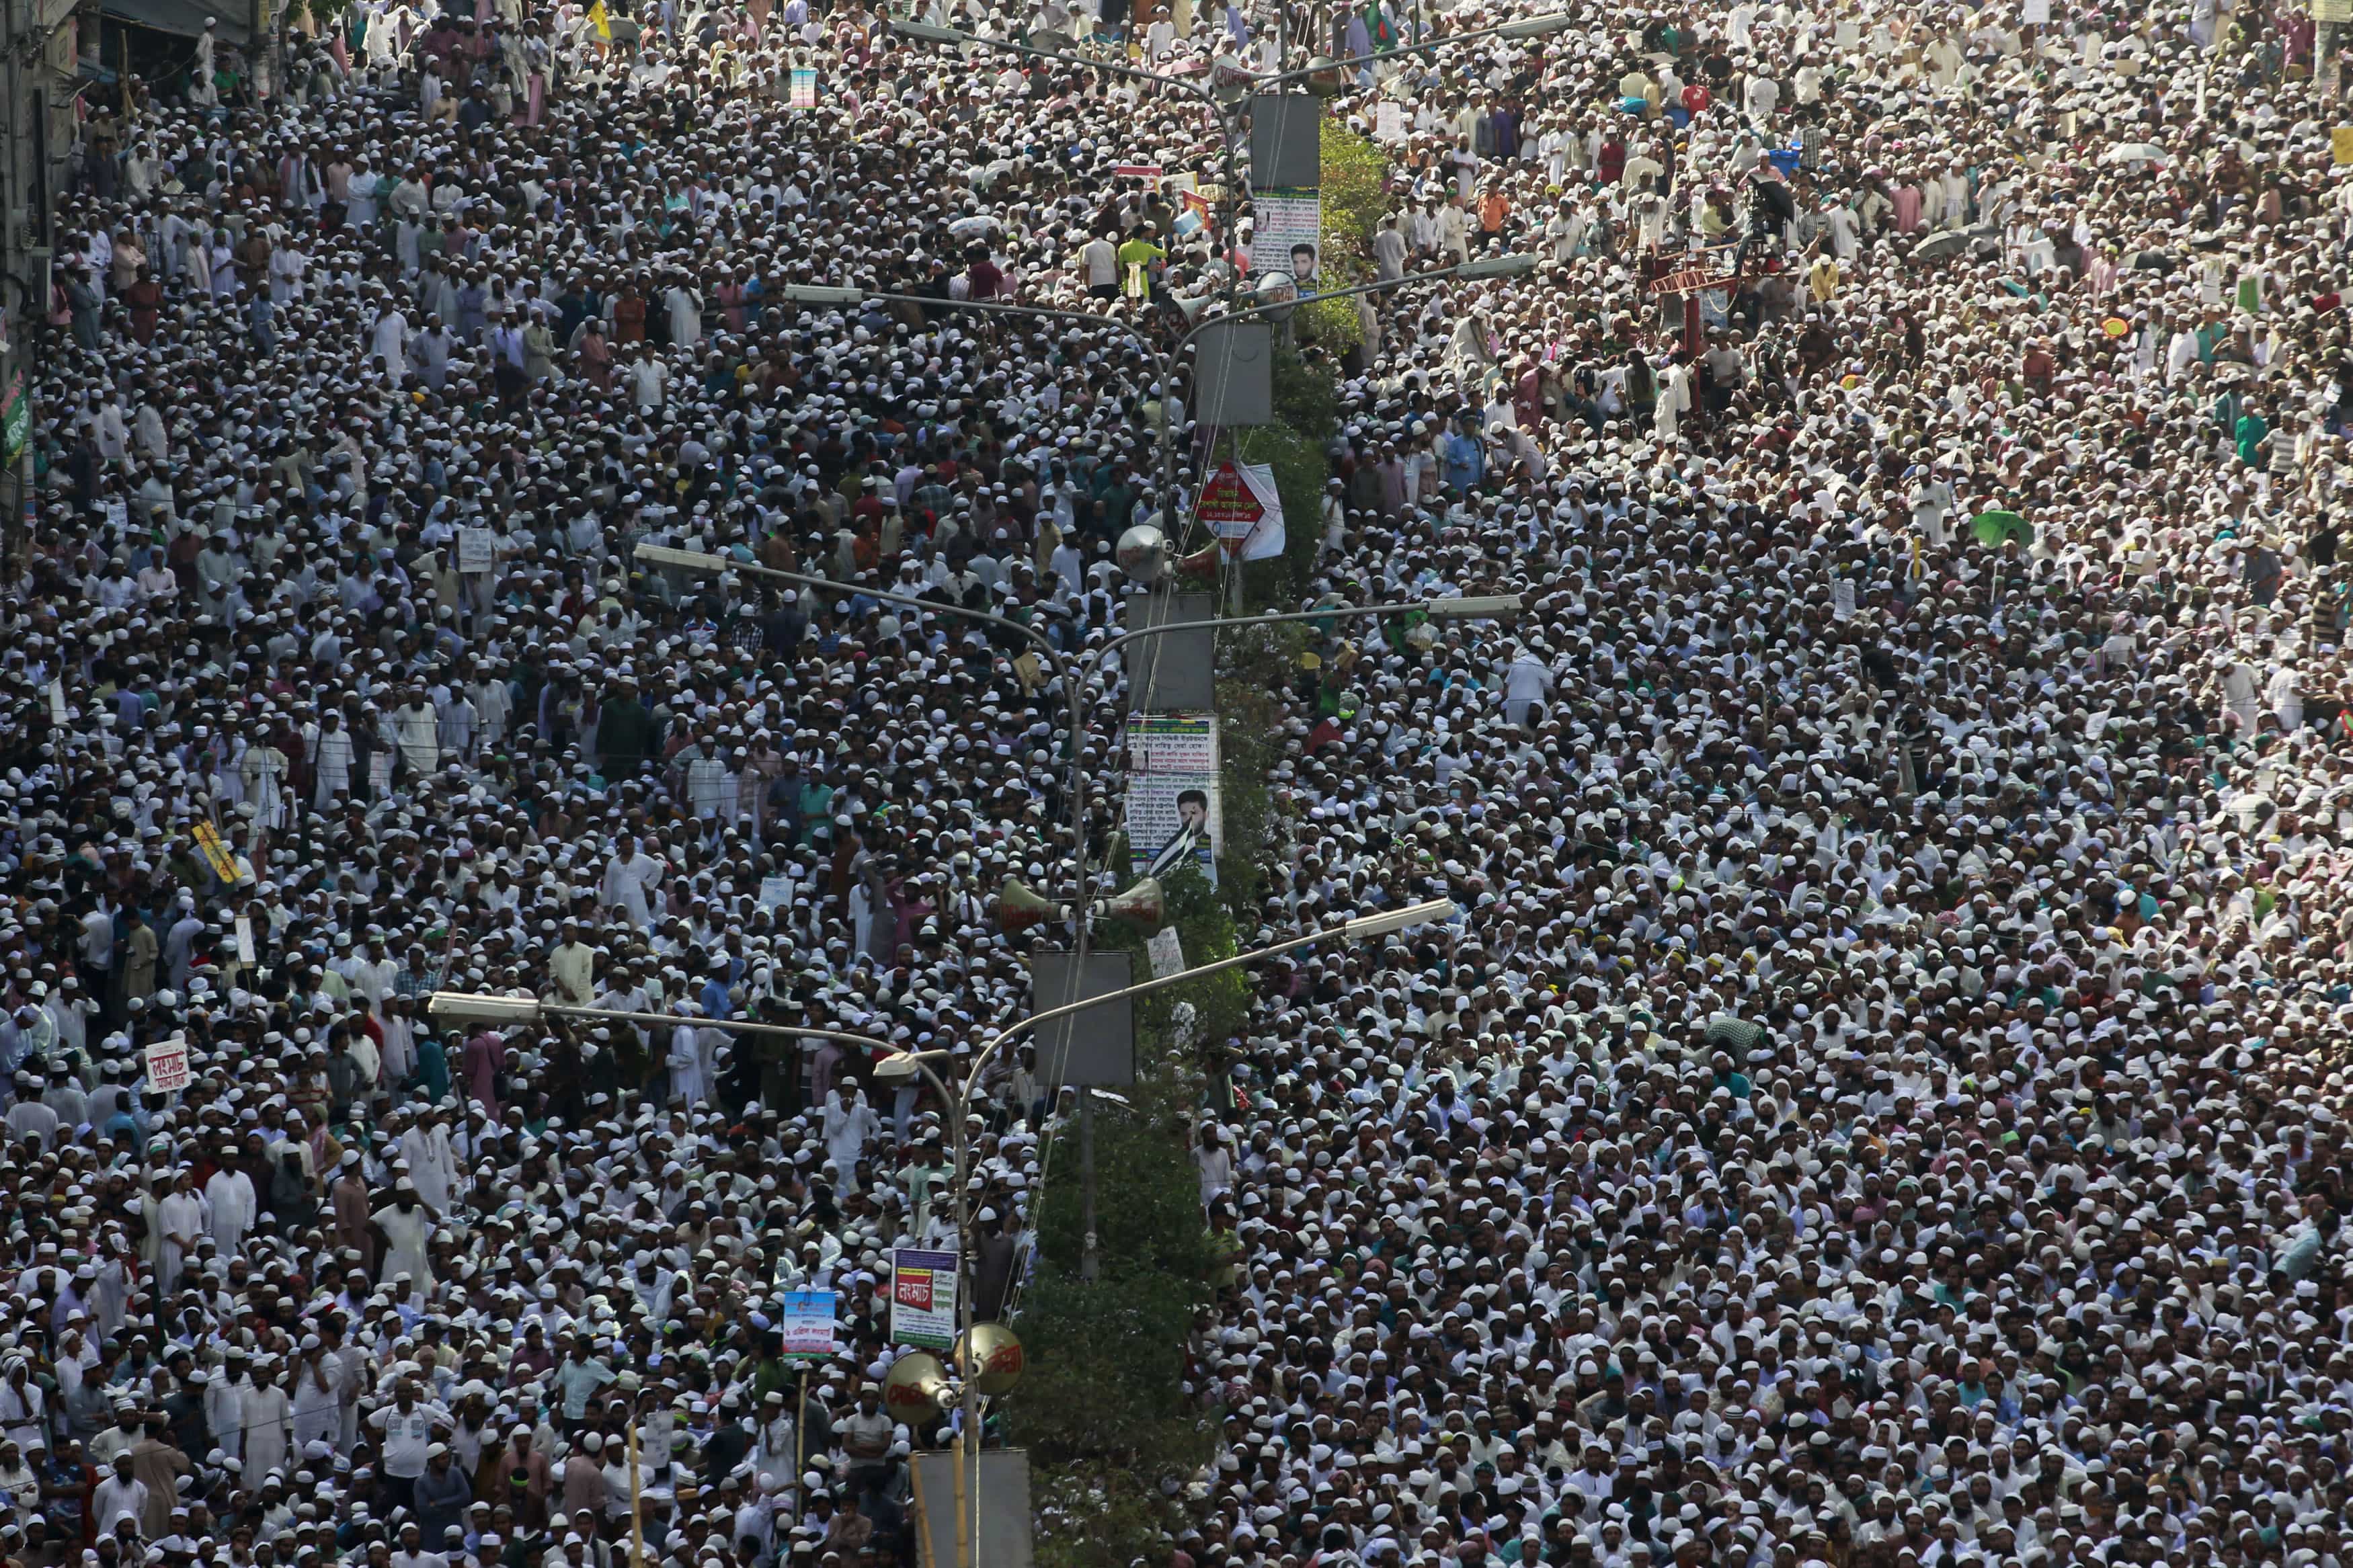 Activists of the Hefajat-e-Islam political party attend a grand rally in Dhaka, 6 April 2013, REUTERS/Andrew Bira